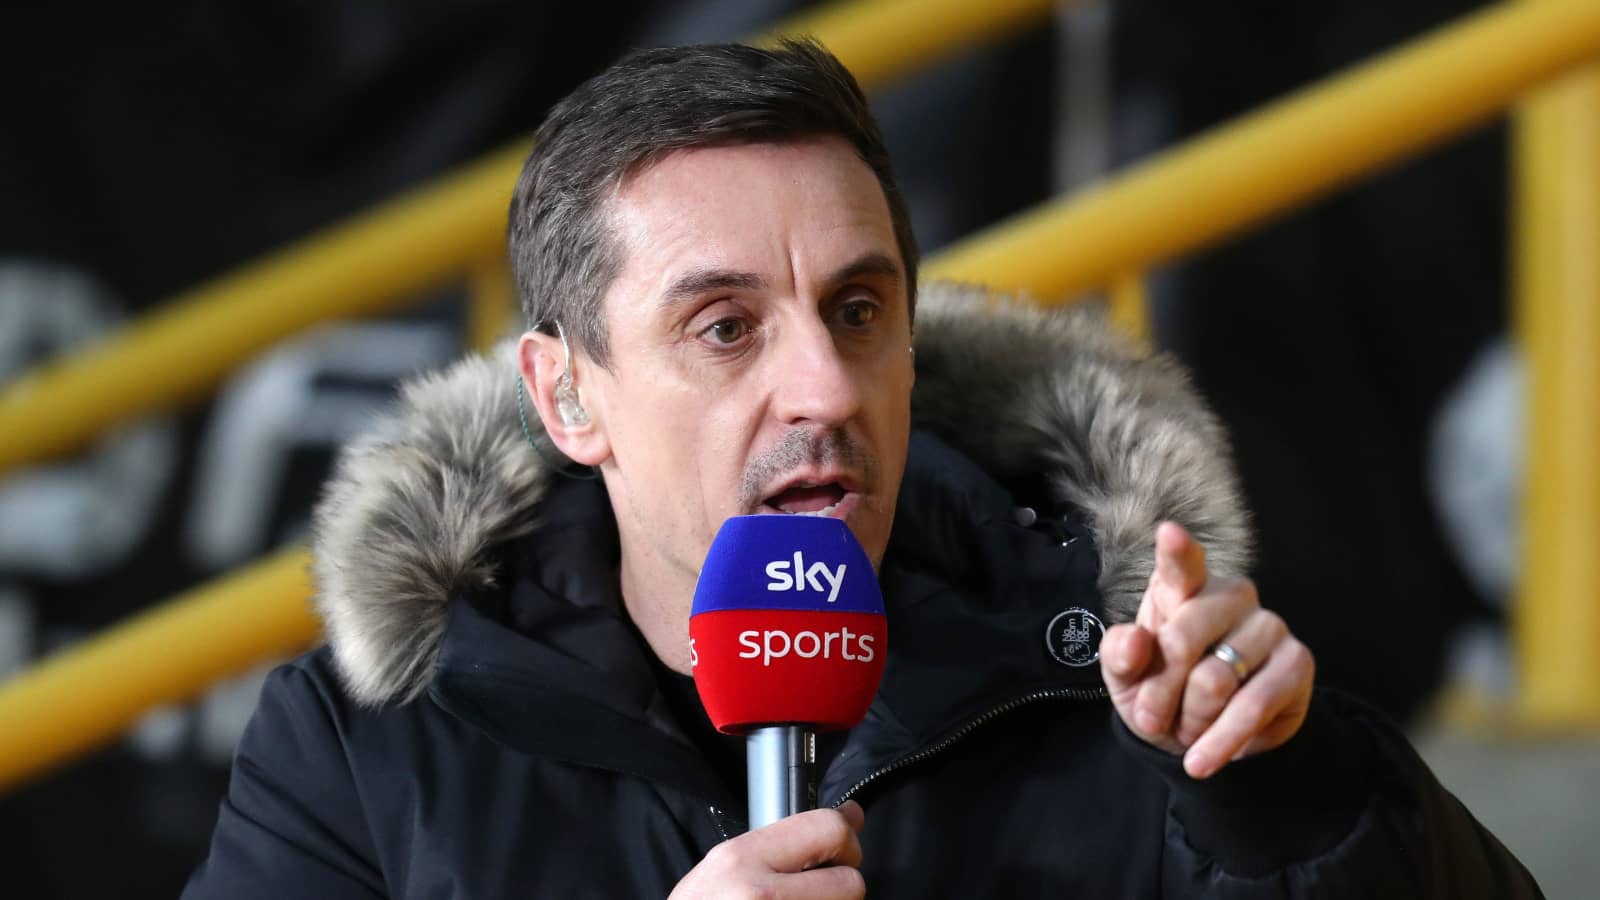 Gary Neville has stated facts regarding the club's current situation and solution